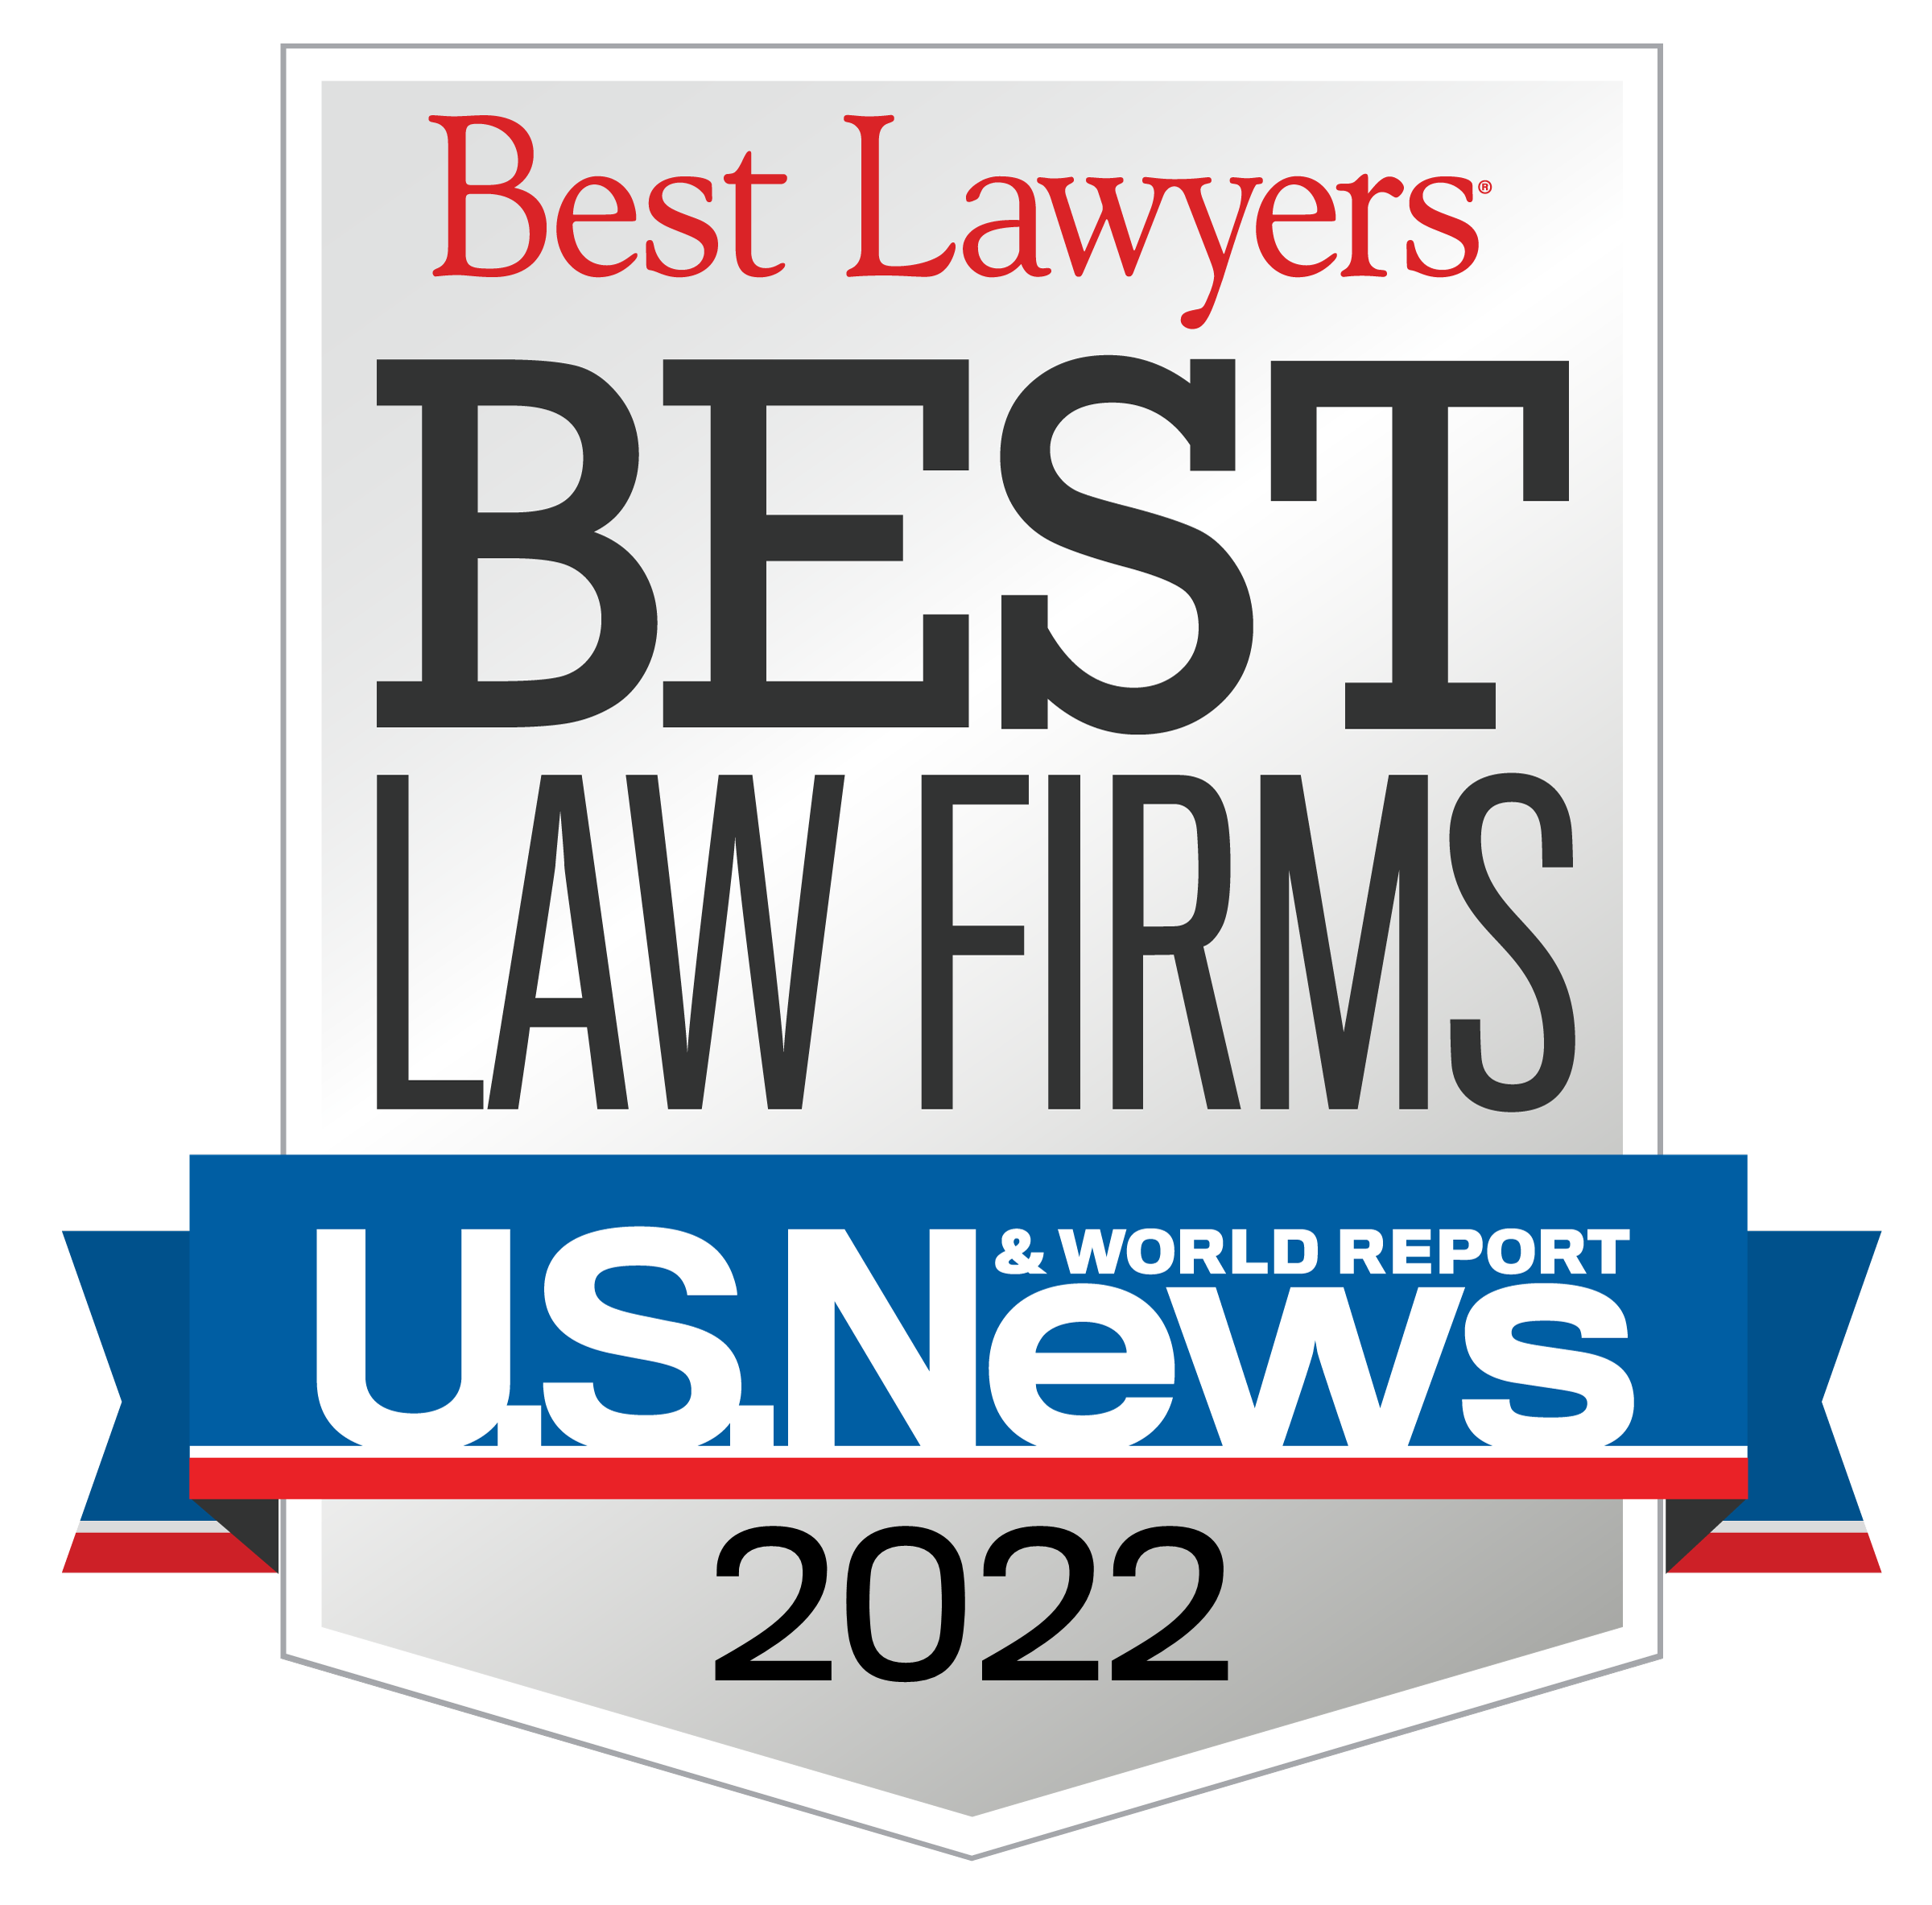 Best Lawyers - Best Law Firms by US News 2022